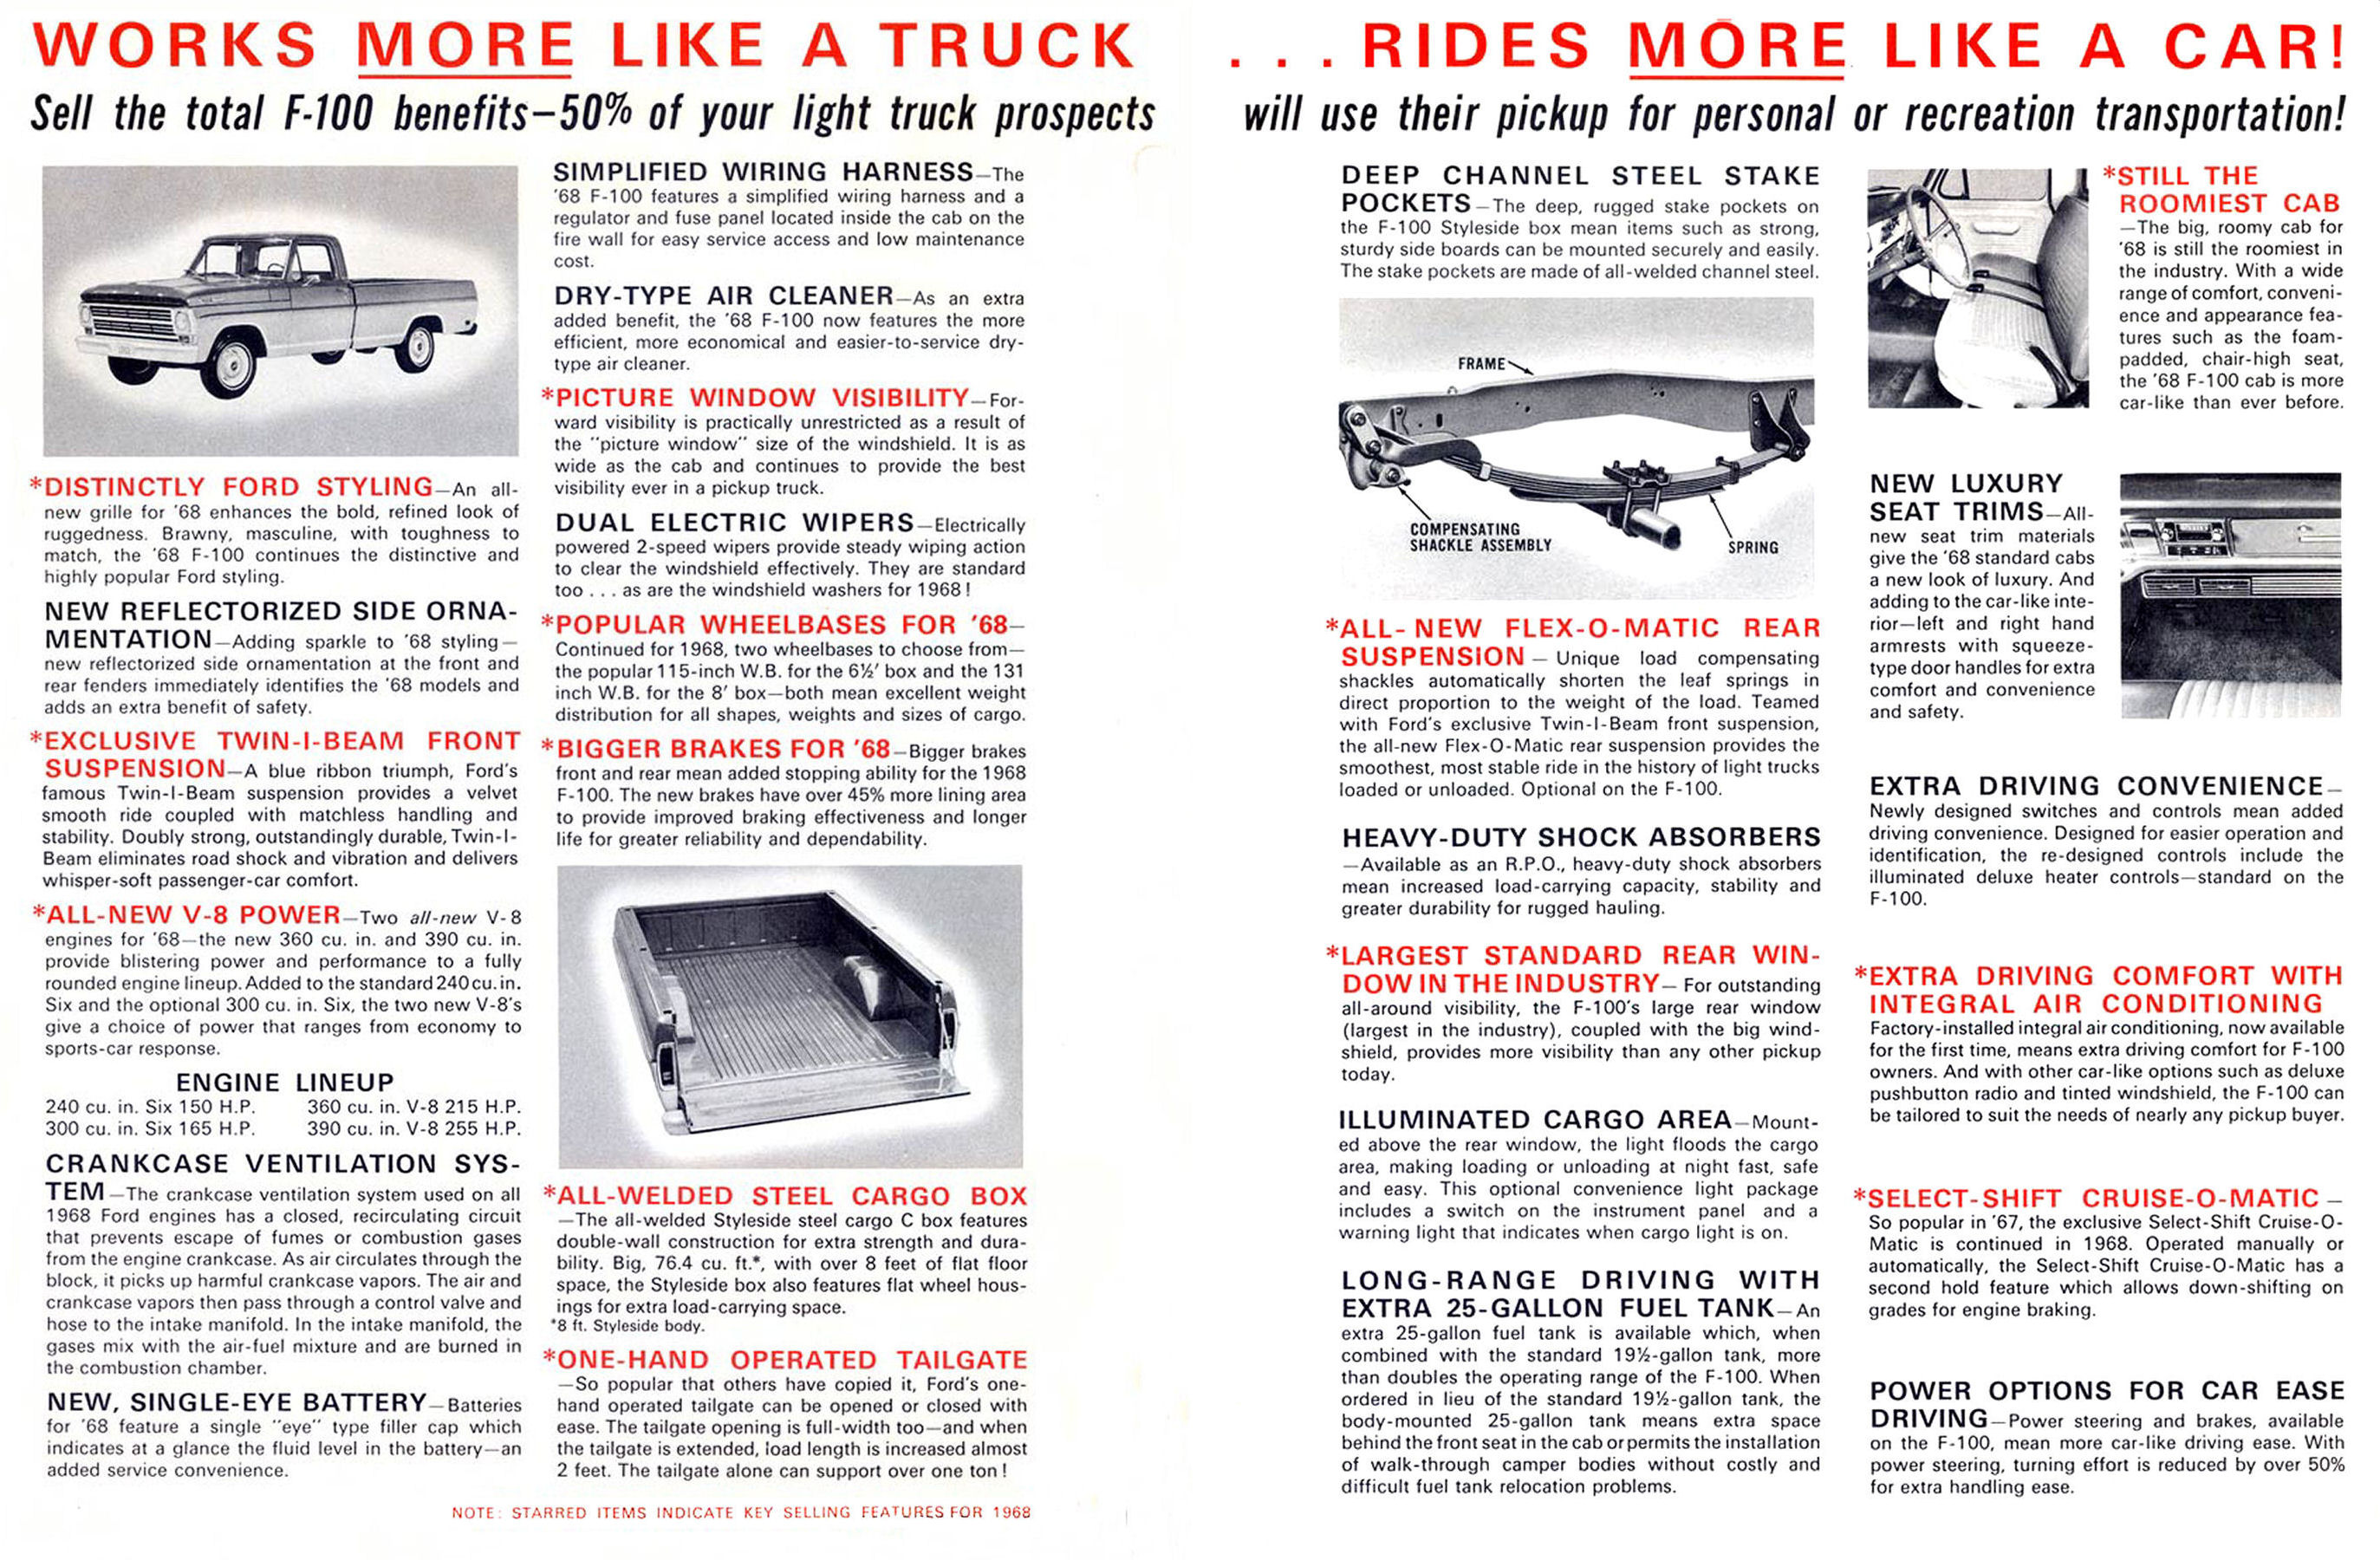 1968 Ford F-100 Sales Features-02-03